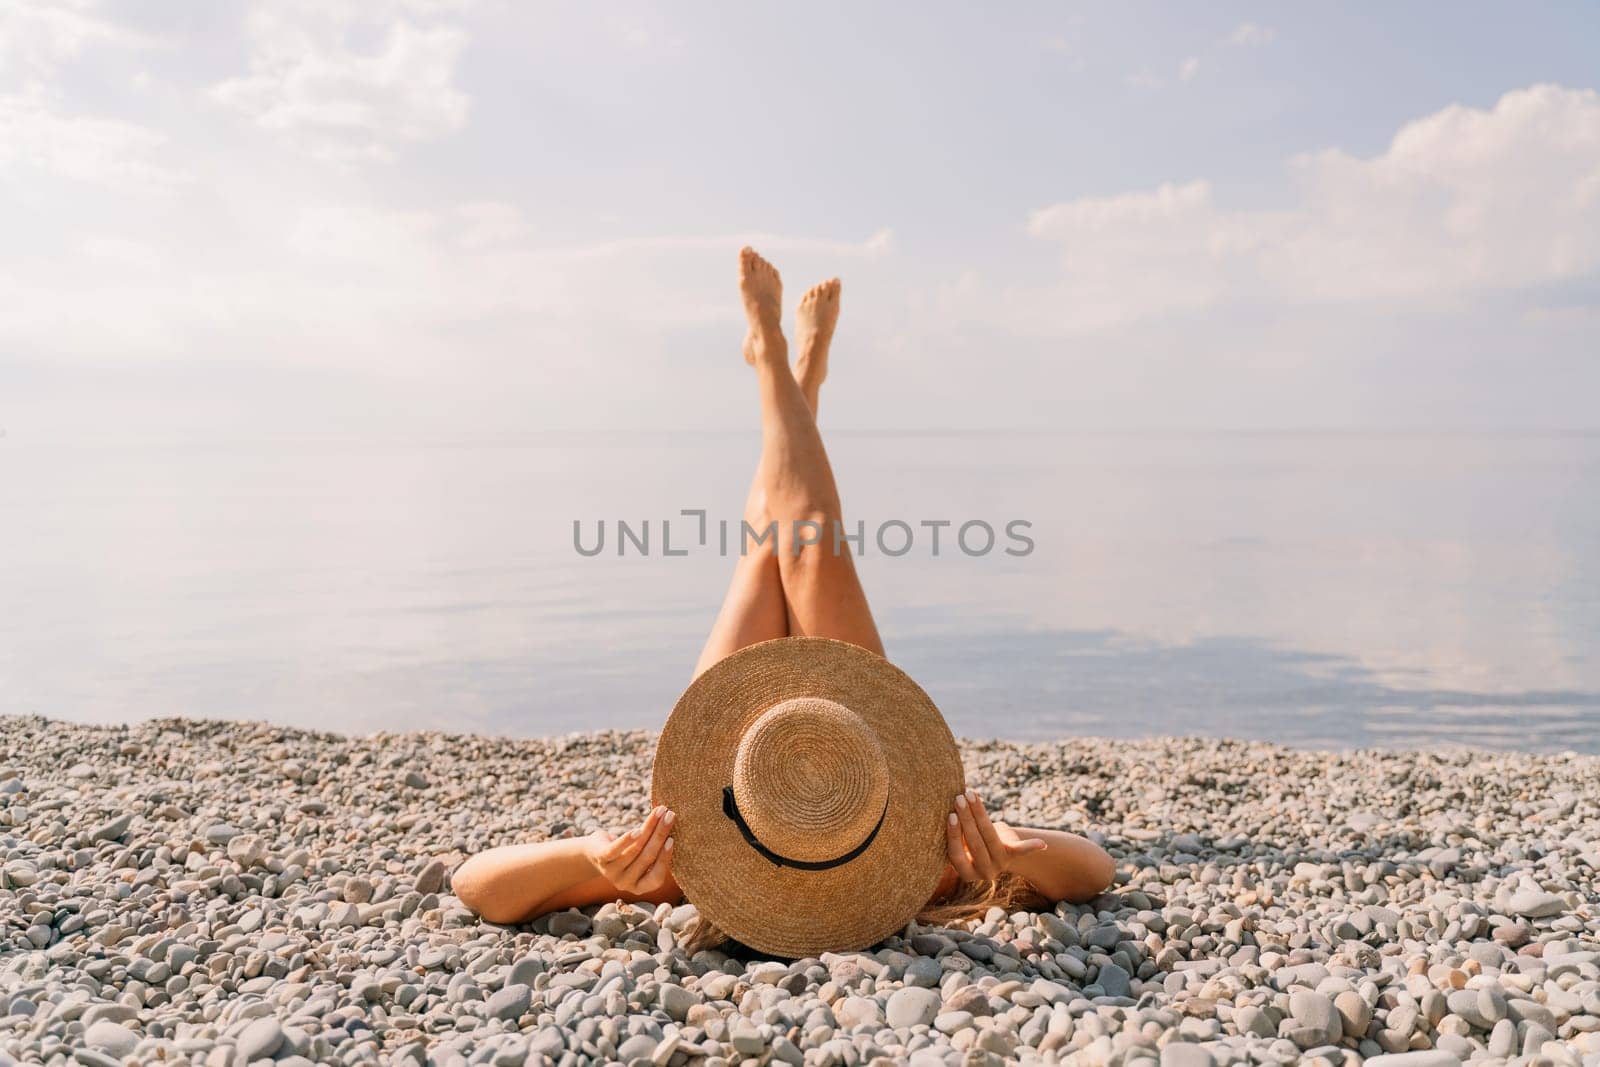 A woman is laying on the beach with her legs crossed and a straw hat on her head. The beach is rocky and the sky is cloudy